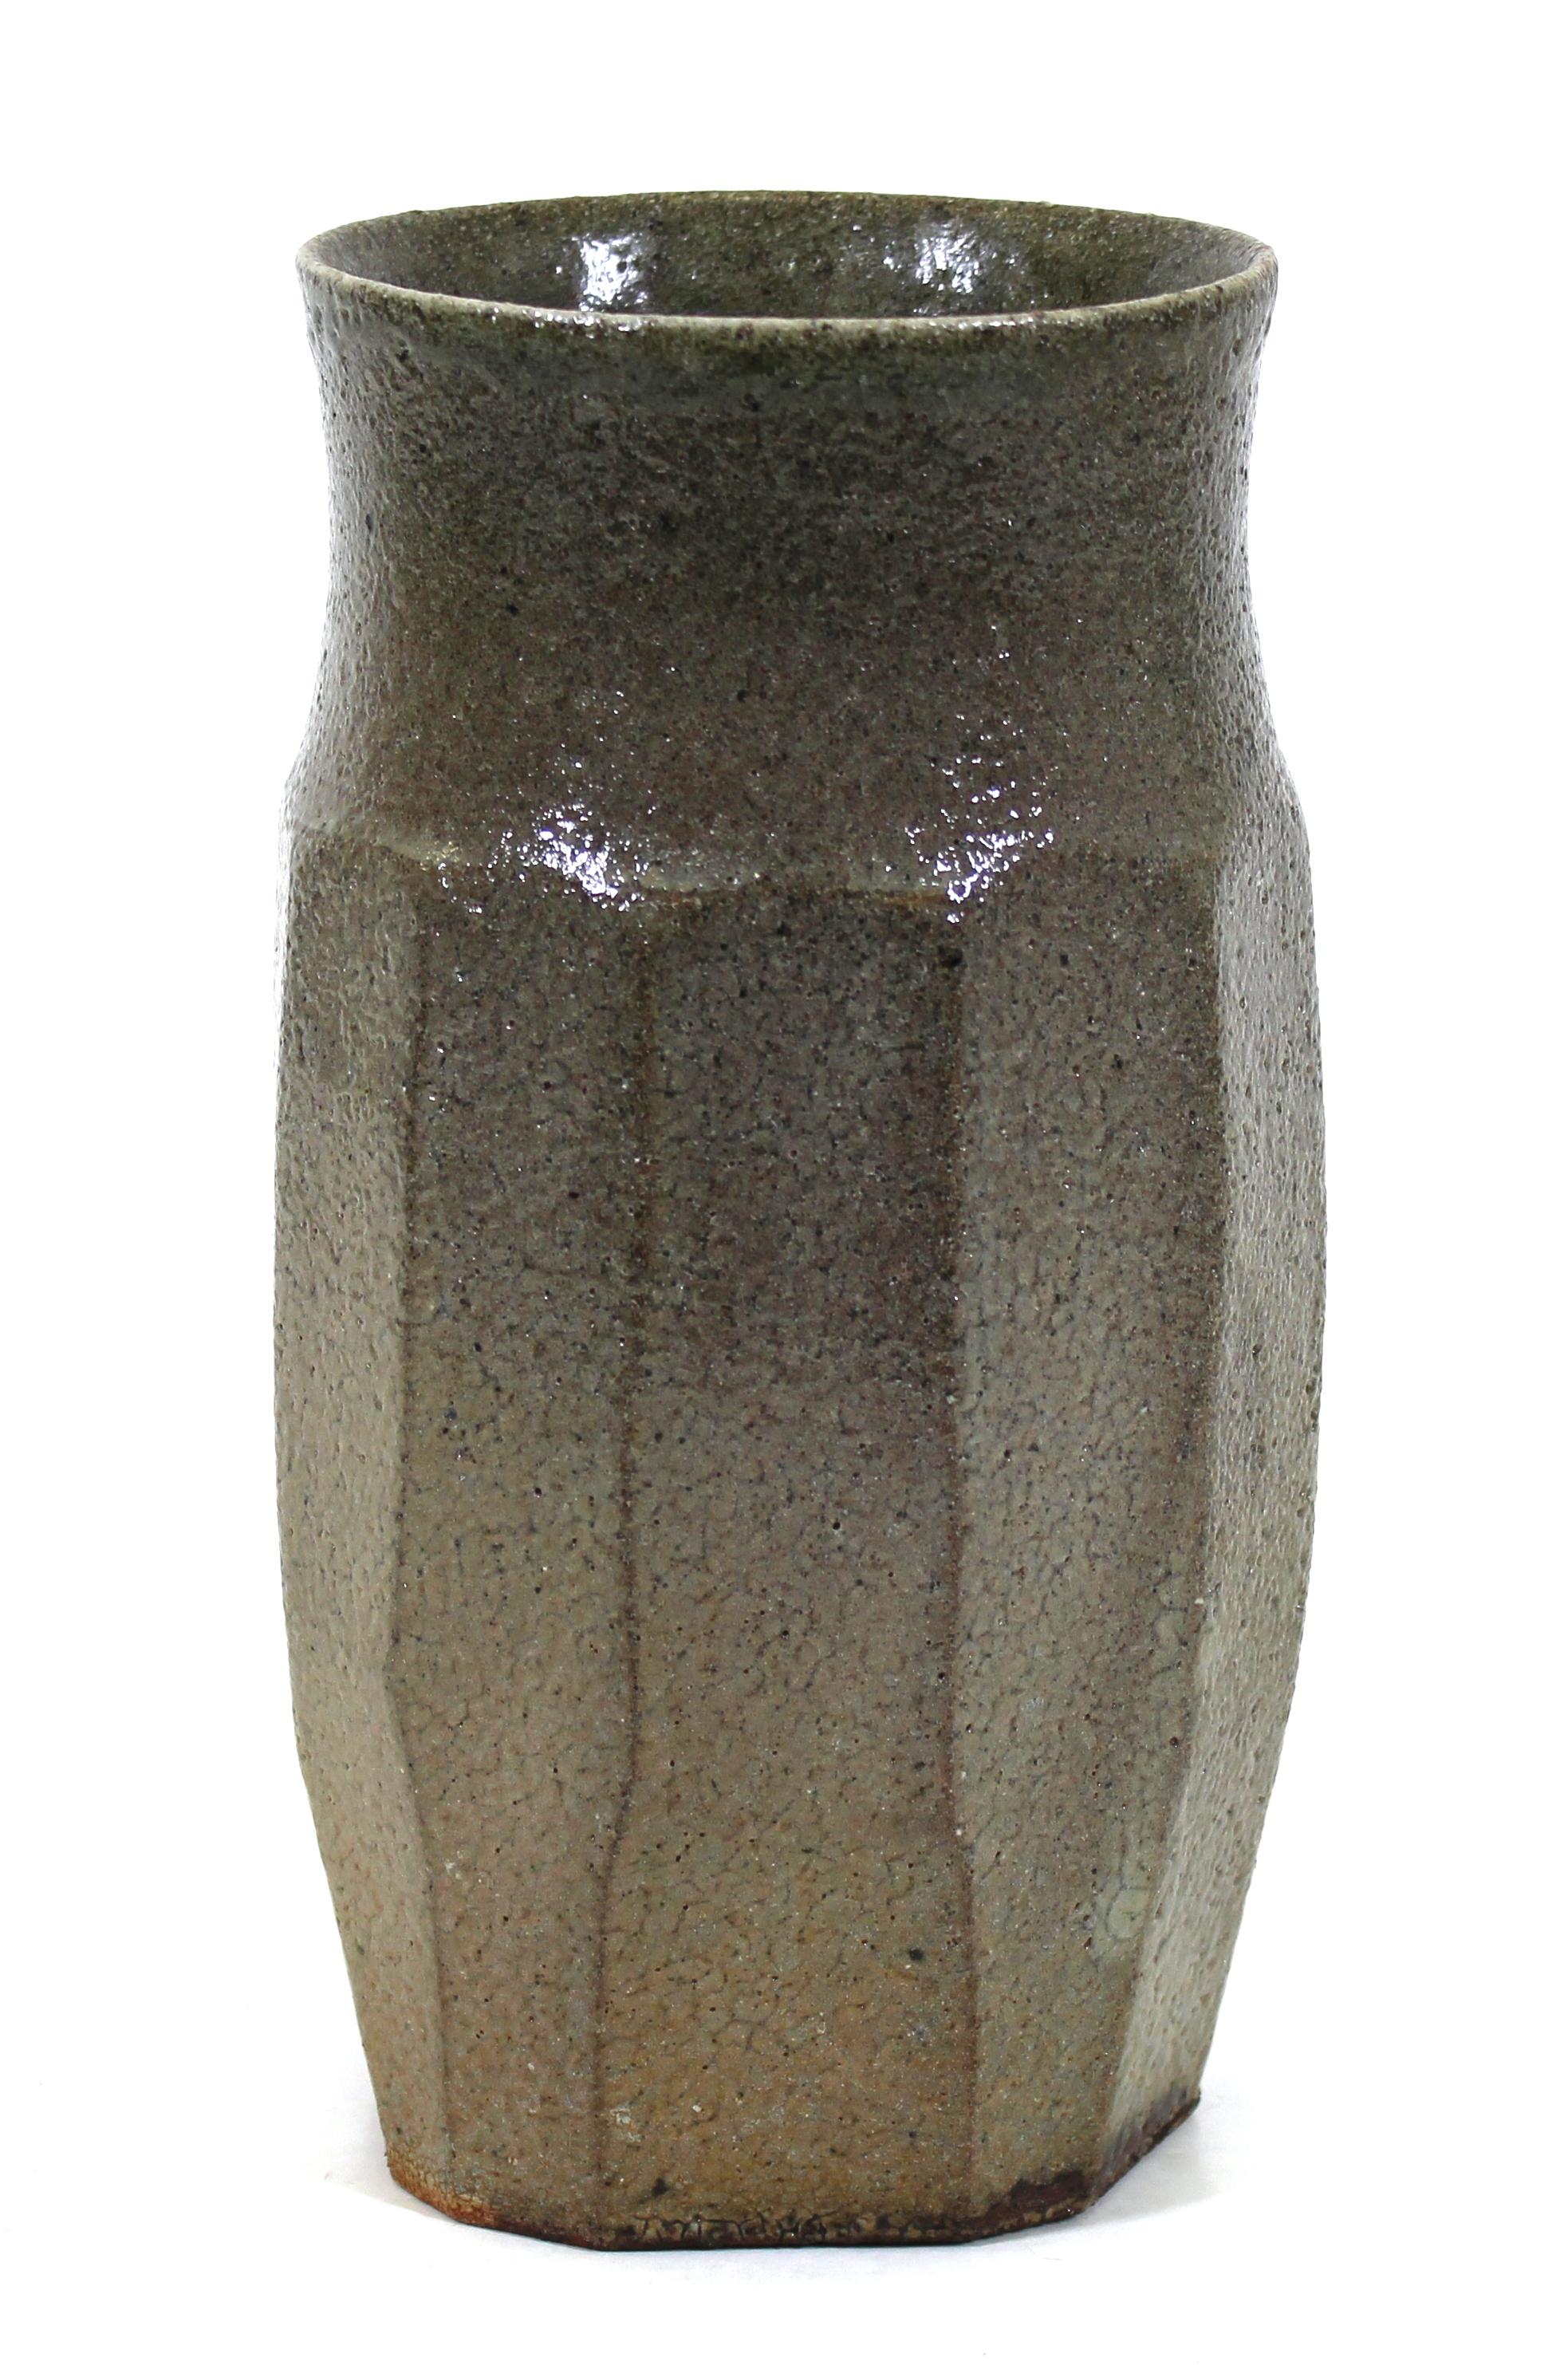 Japanese Mid-Century Modern art studio ceramic pottery vase, marked on the bottom. In great vintage condition with age-appropriate wear and use.